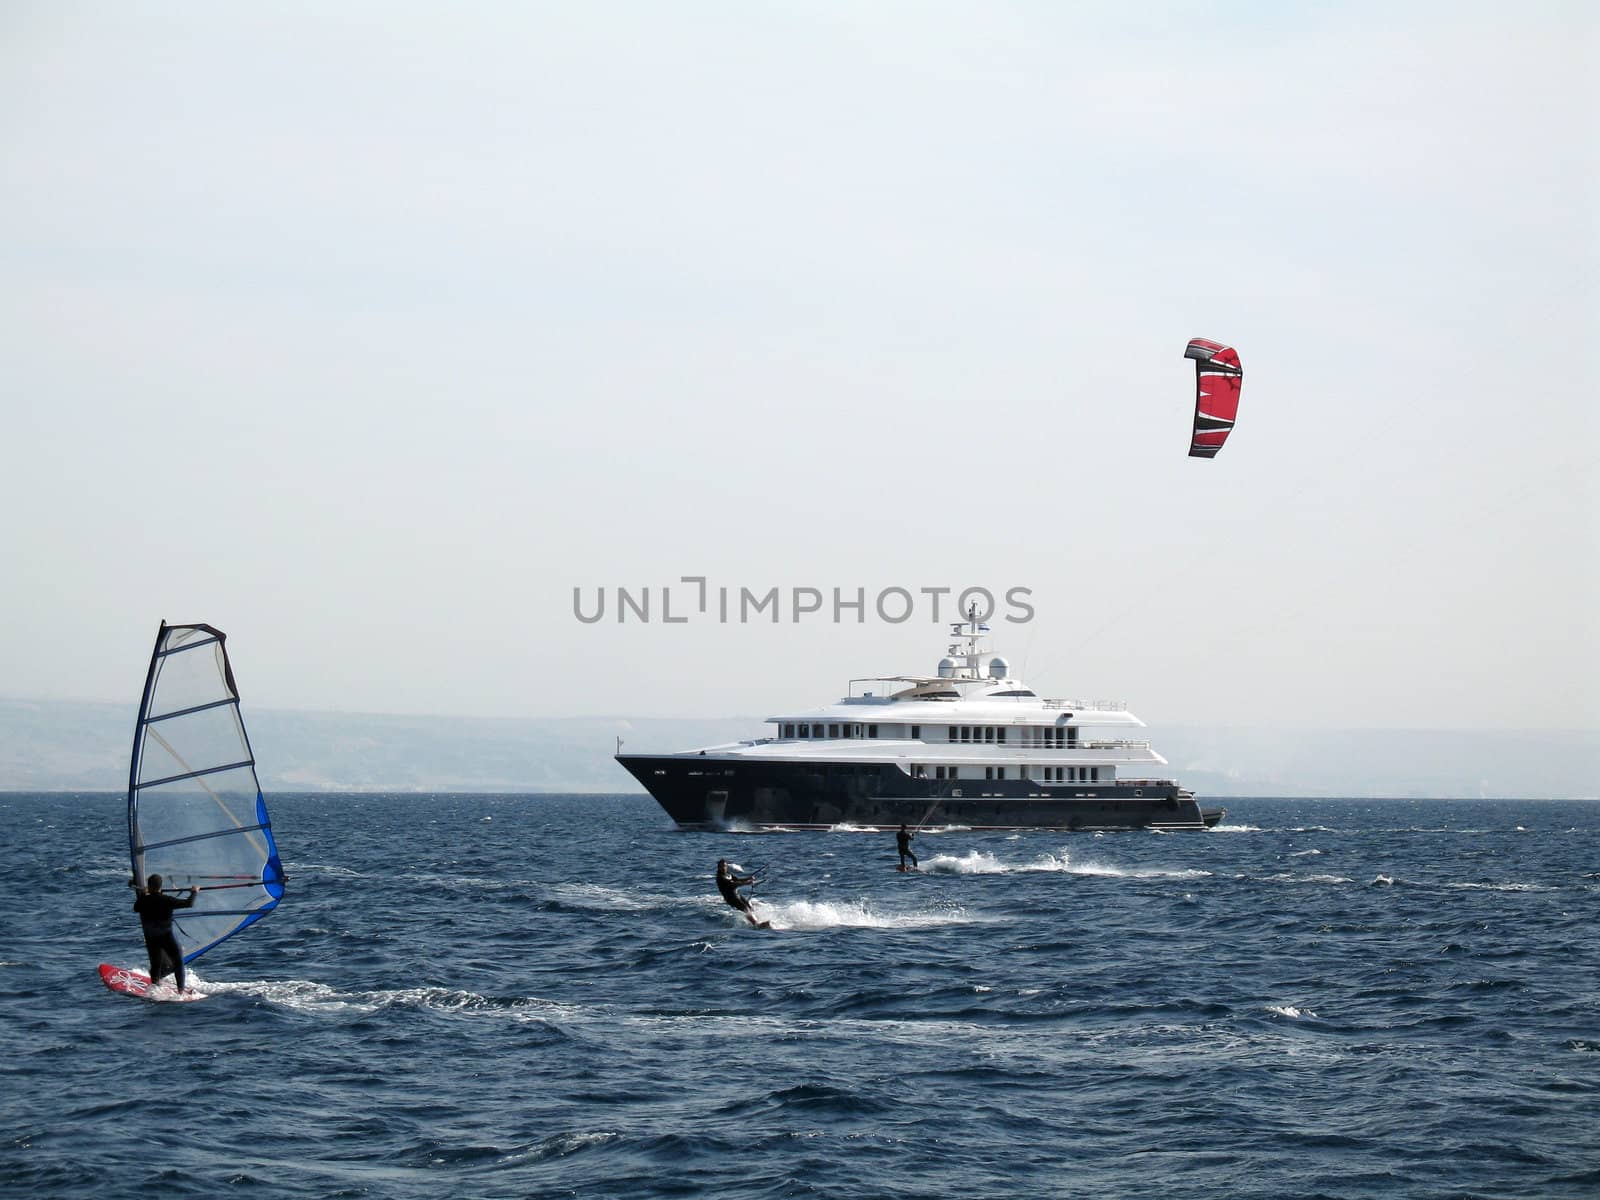 A windsurfing and kitesurfing on the sea by Michael_Feigin